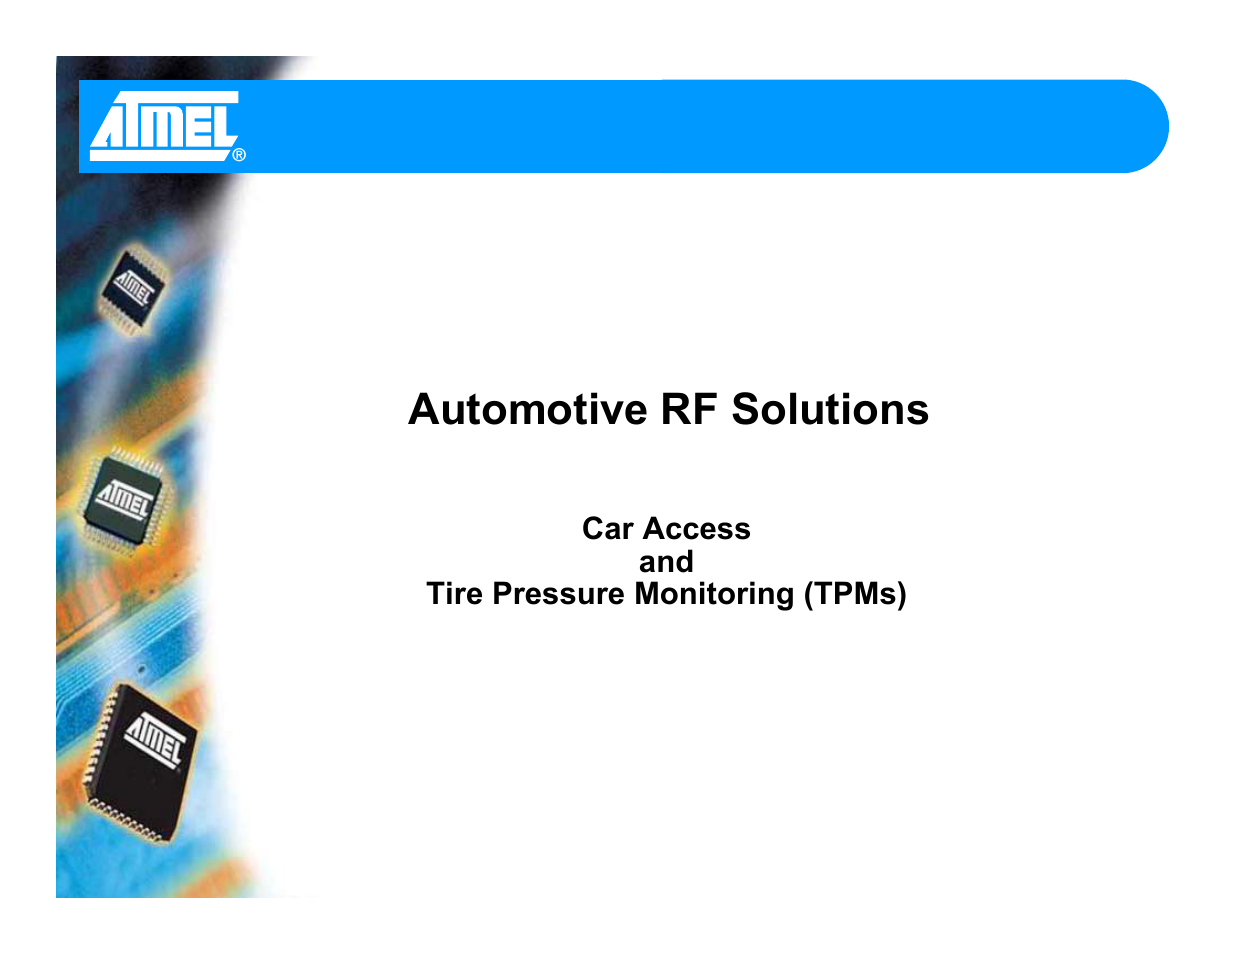 Car Access and Tire Pressure Monitoring (TPMs)